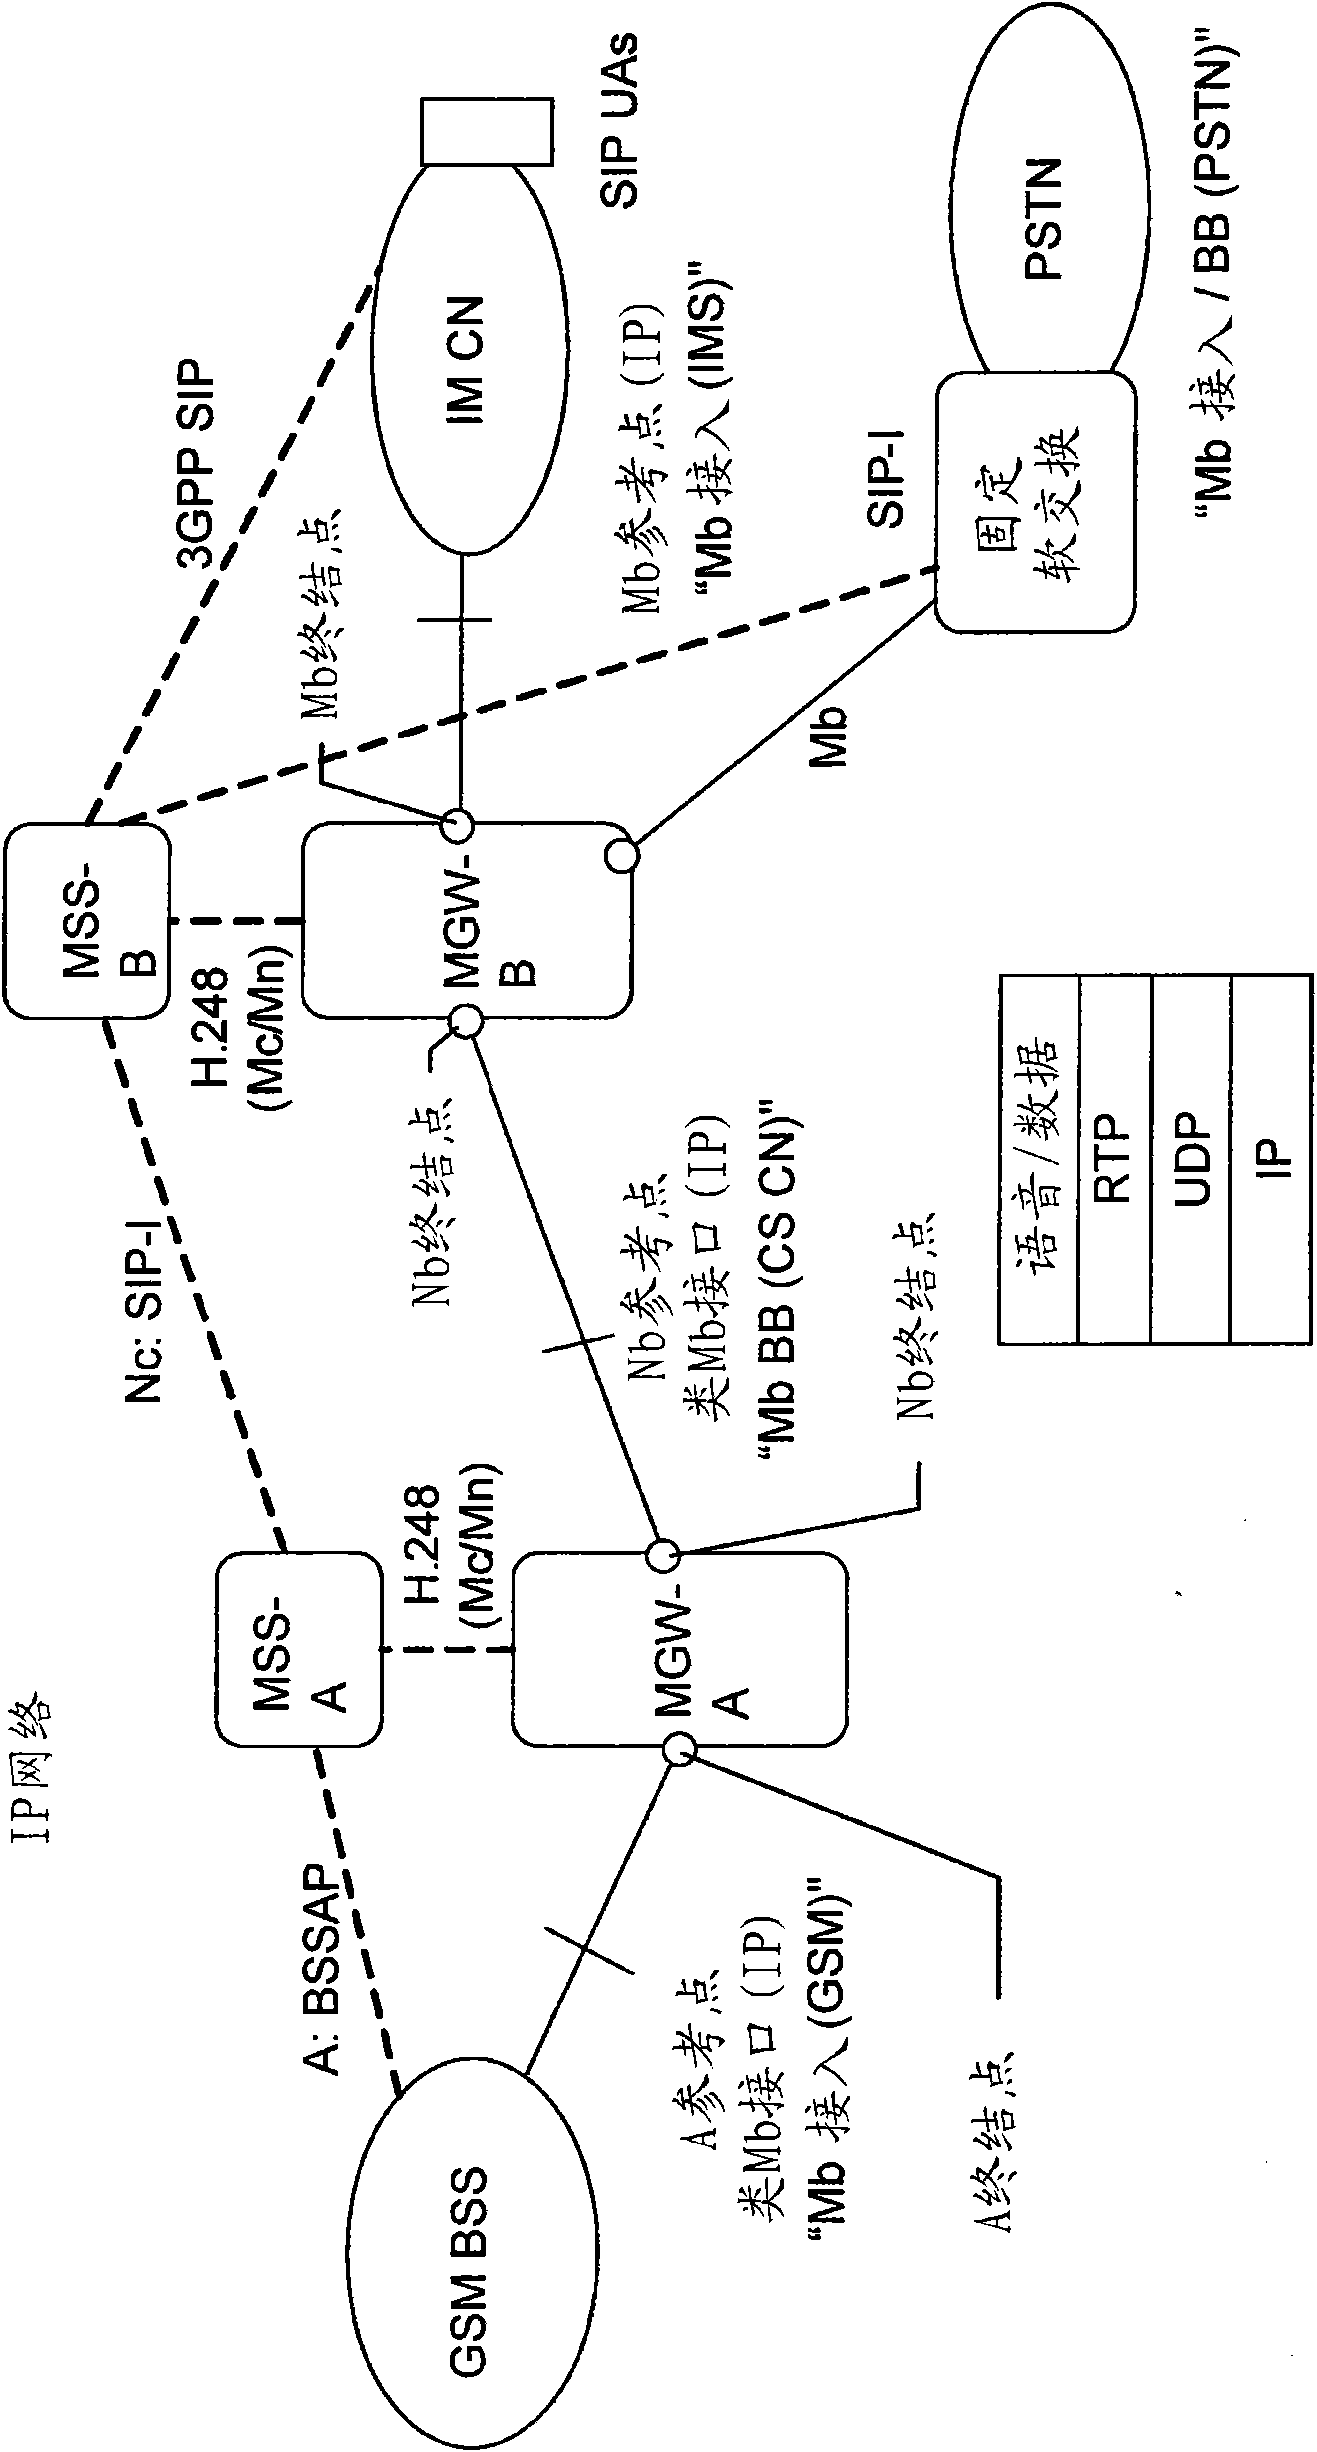 Different ip interfaces in a communication network system